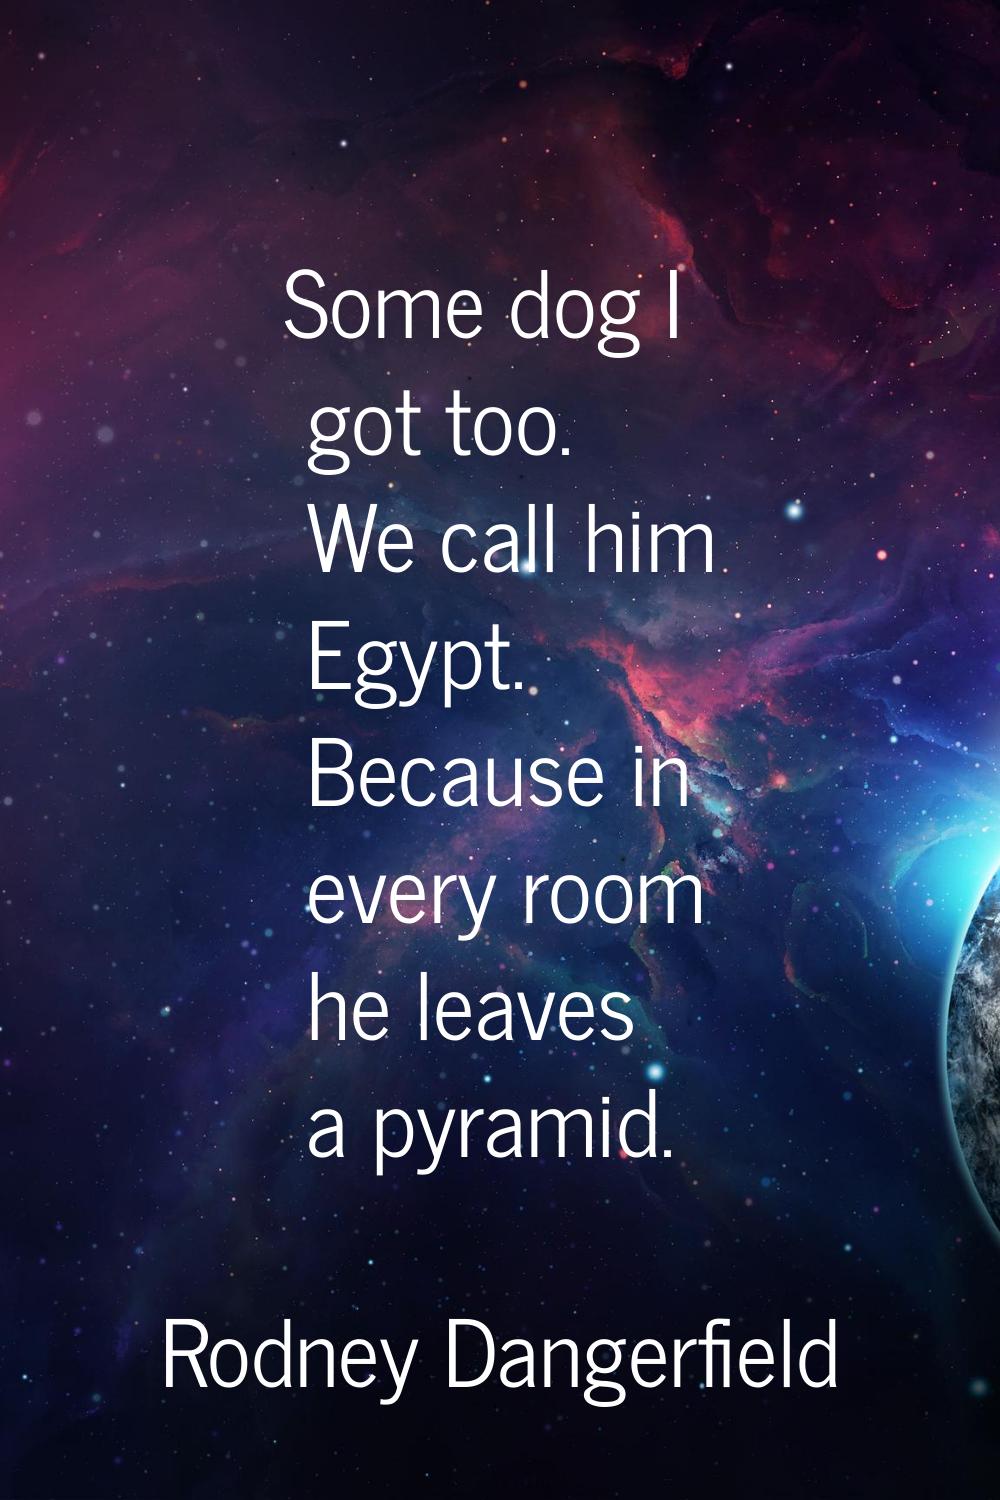 Some dog I got too. We call him Egypt. Because in every room he leaves a pyramid.